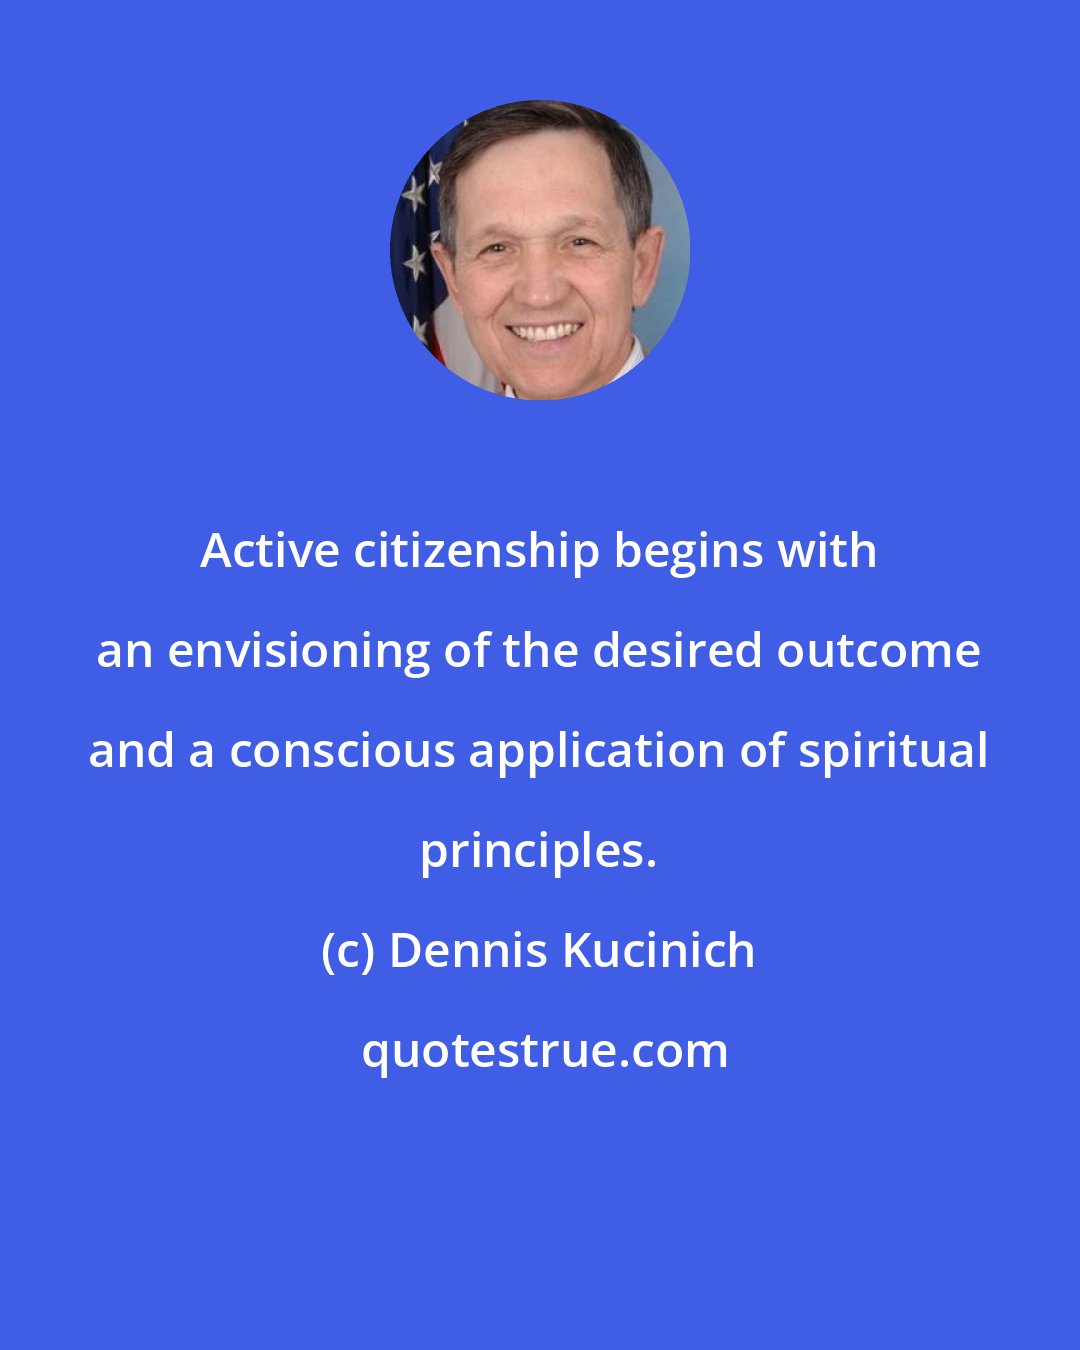 Dennis Kucinich: Active citizenship begins with an envisioning of the desired outcome and a conscious application of spiritual principles.